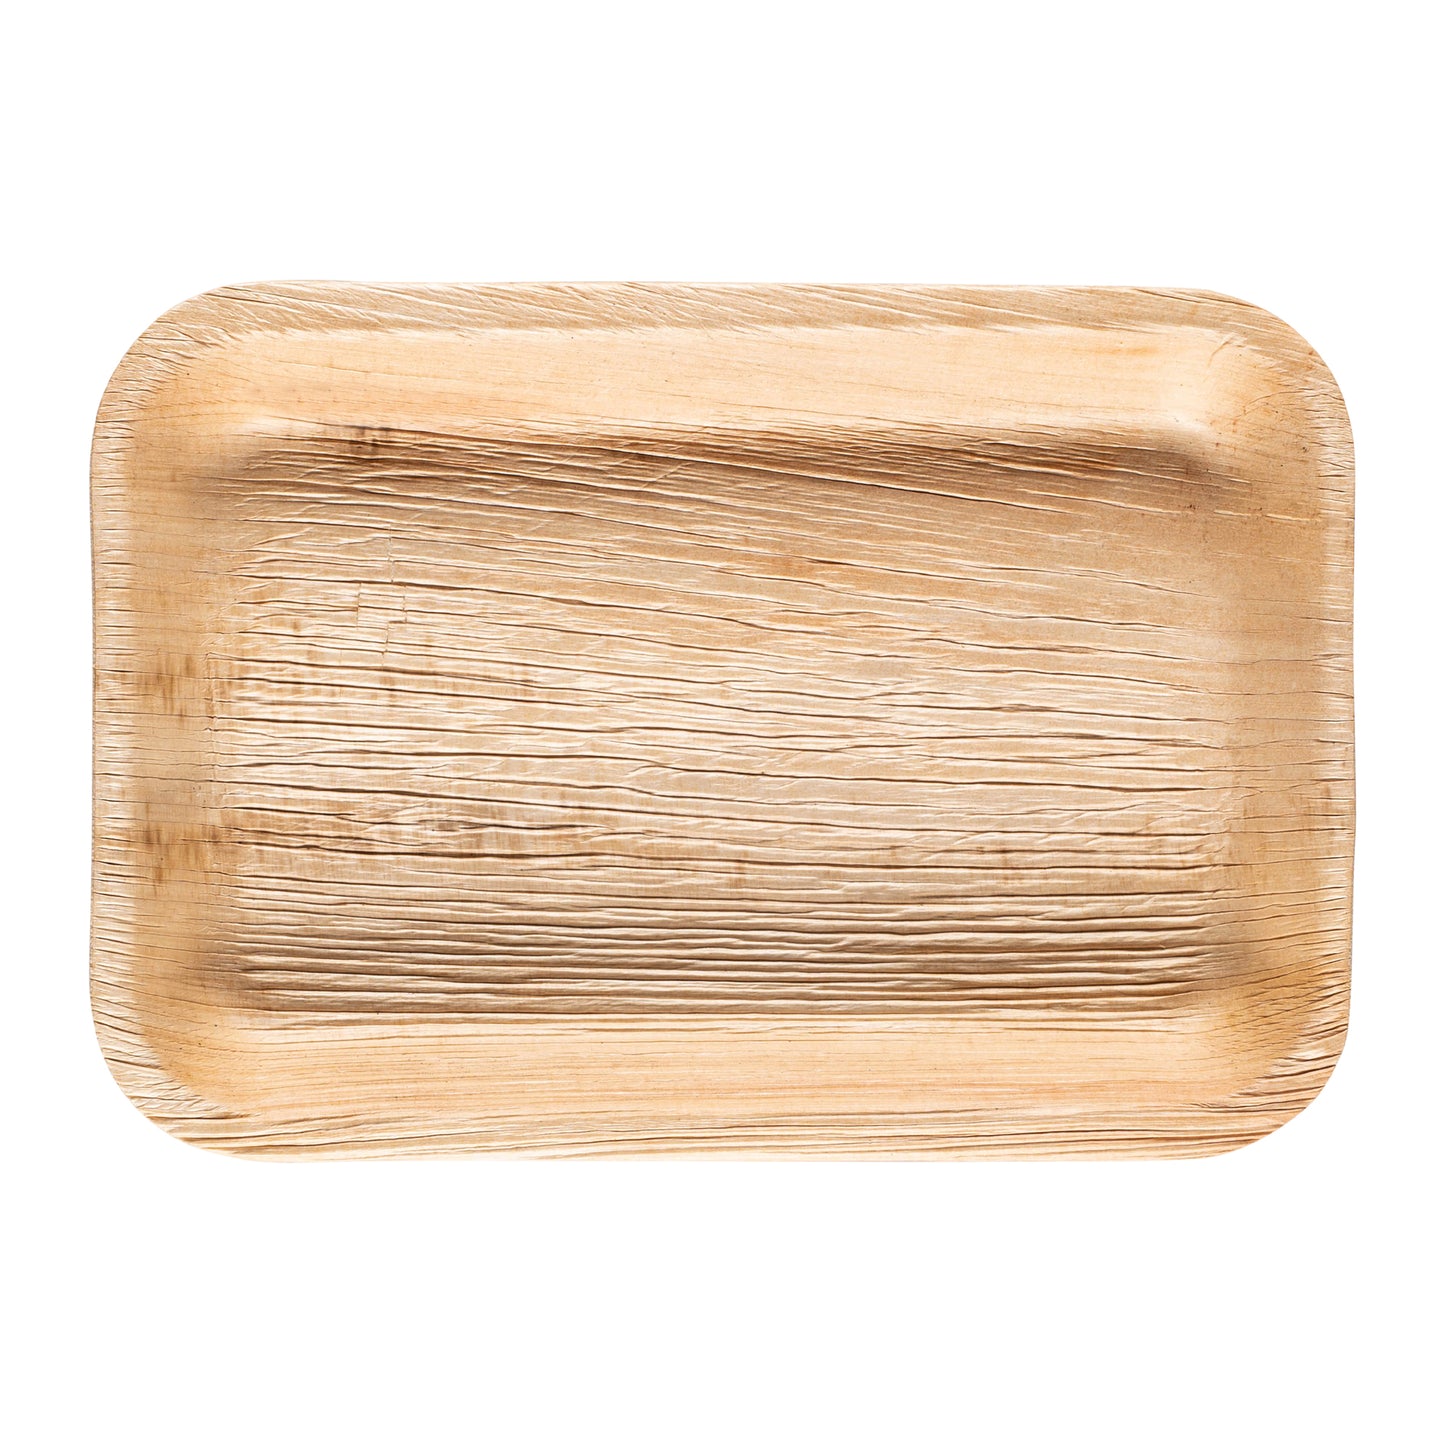 Rectangular Natural Palm Leaf Disposable Eco-Friendly Trays (9" x 6")